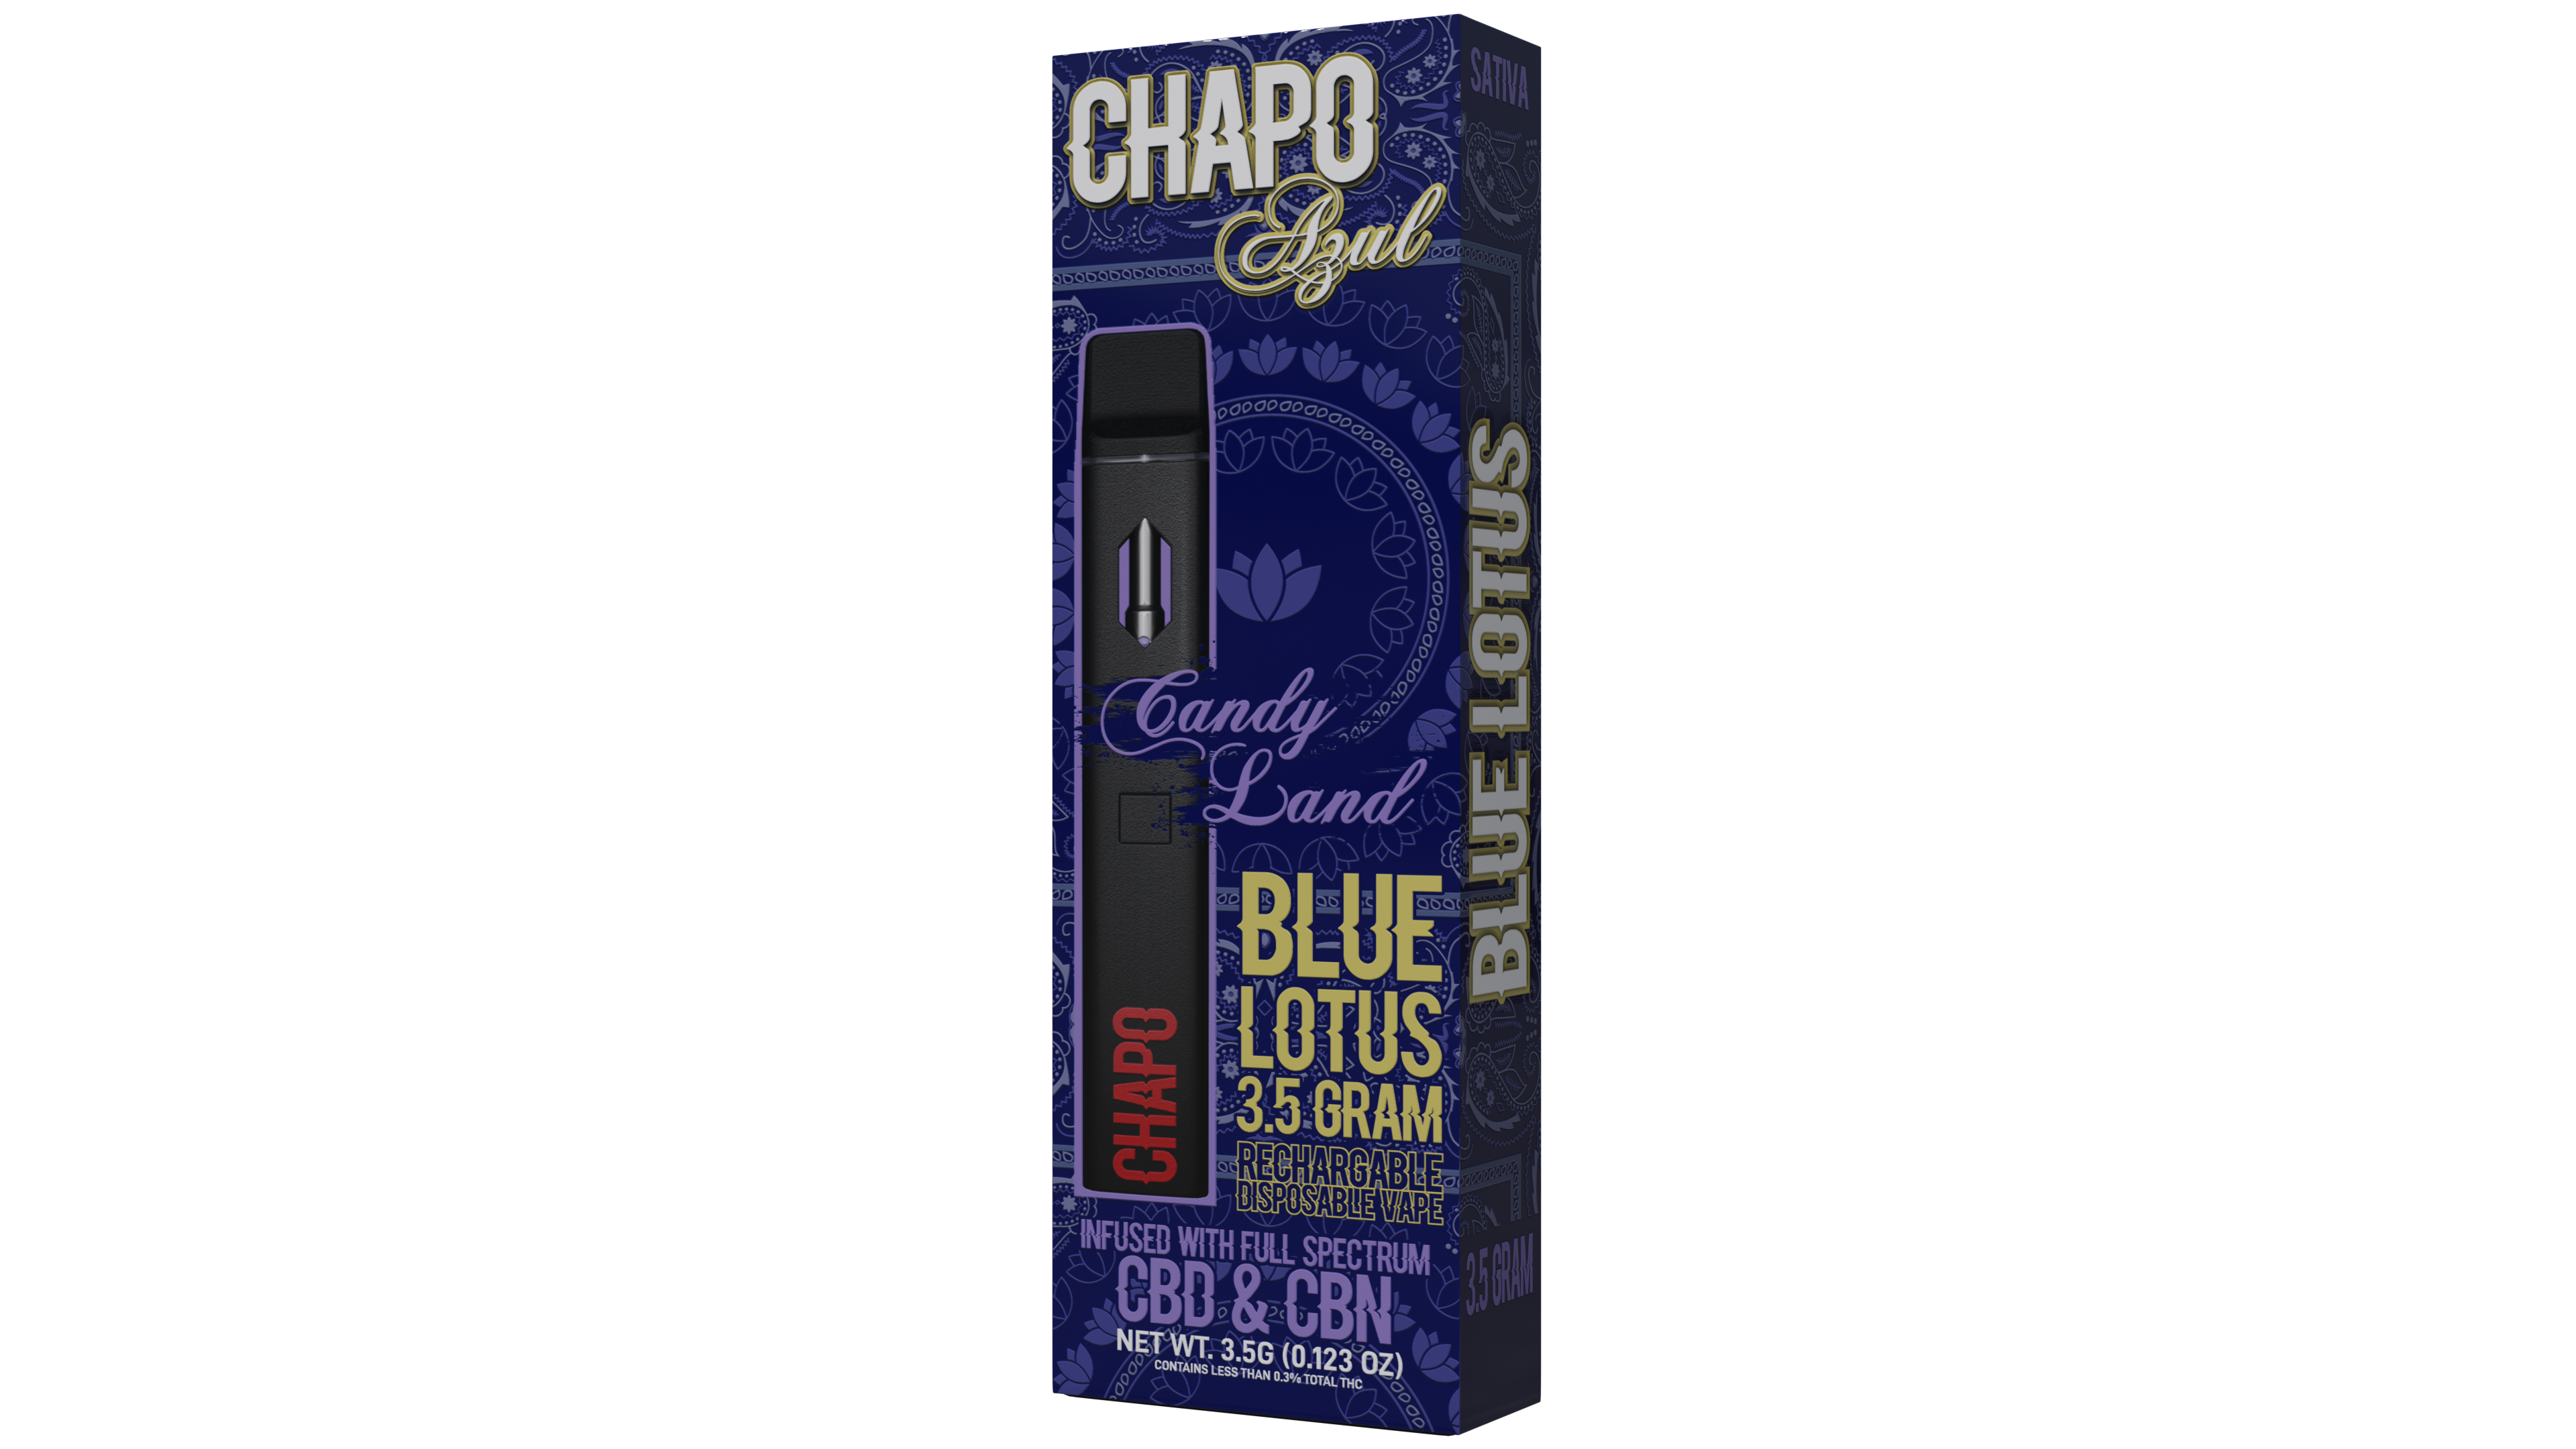 Chapo Azul Blue Lotus Infused with Full Spectrum CBD & CBN 3.5g Disposables 6 pack - Vape Masterz